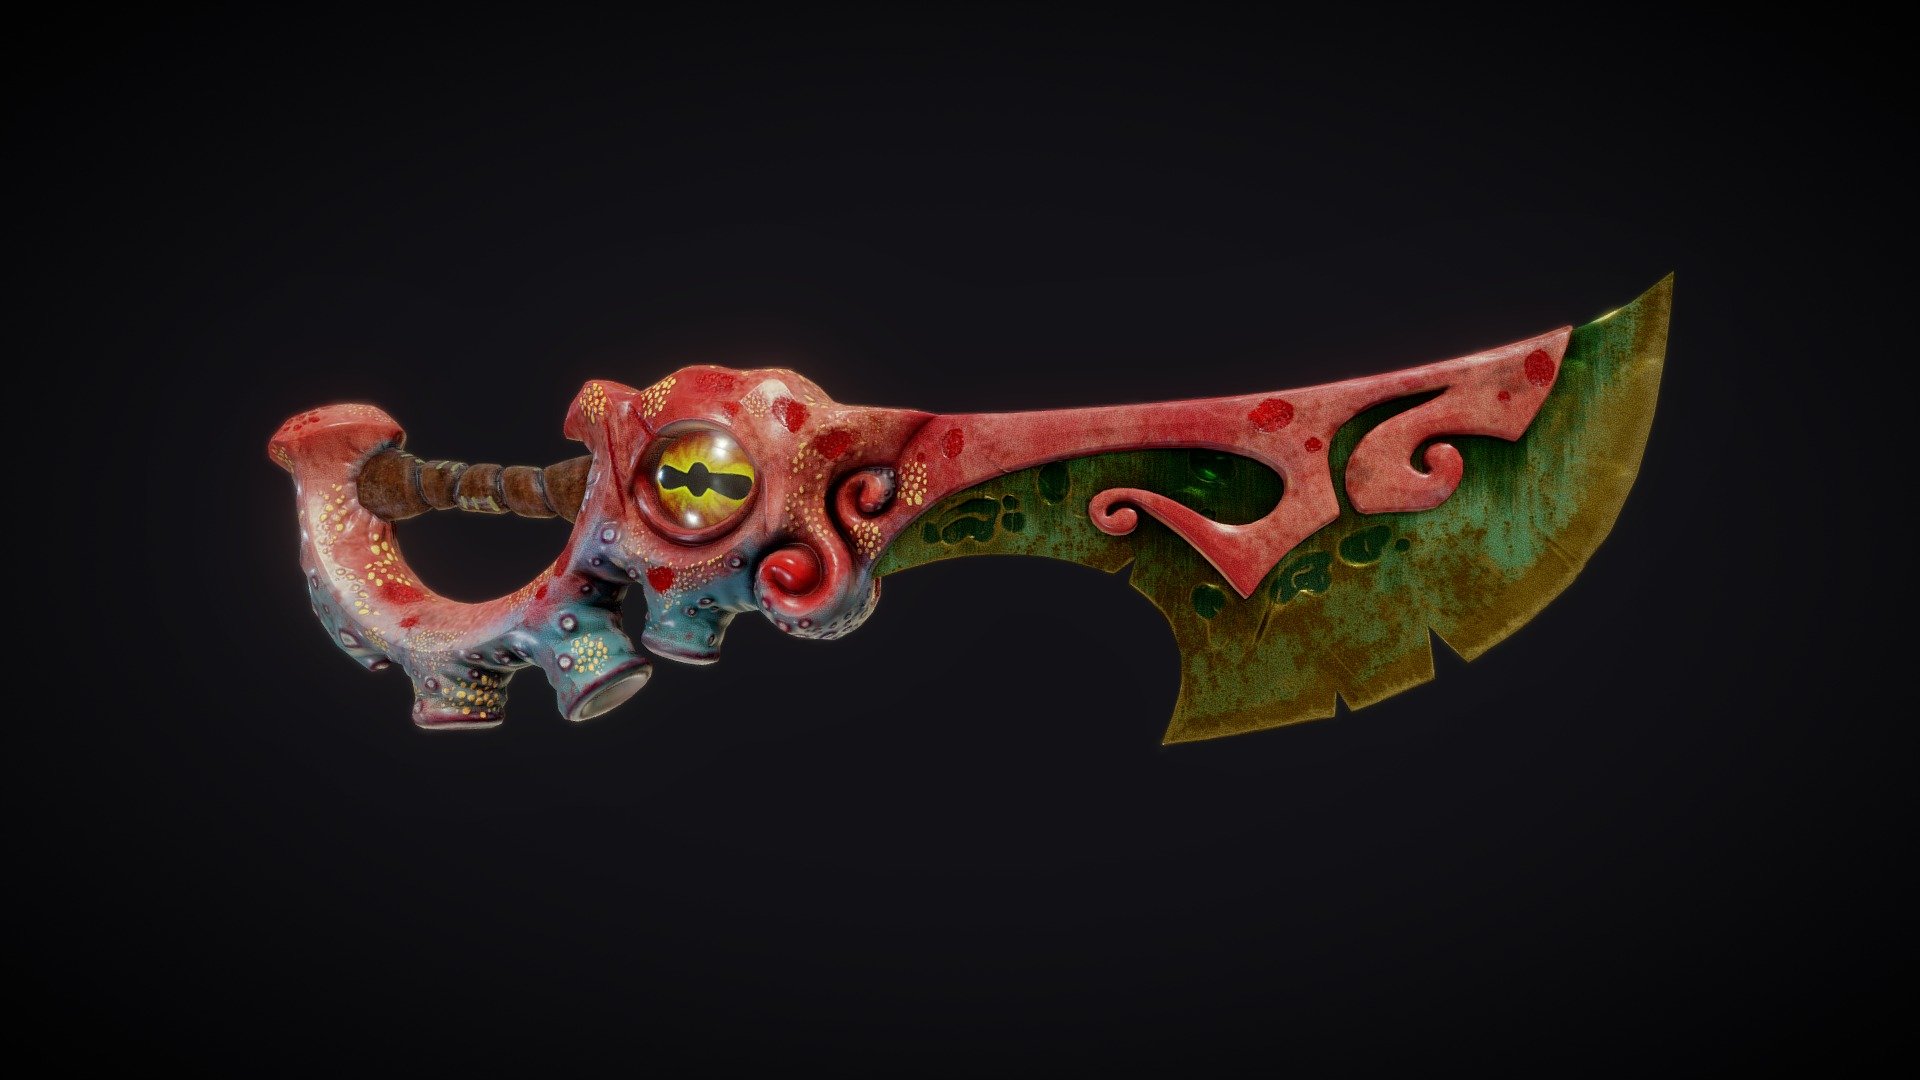 3d sculpt based on the great concept by carlos ruiz https://kairuiz.artstation.com/projects
i decided to take it a little more realistic and slightly less cartoony, comments and critiques welcome - Sqiddy Sword AKA Stabby Stick - 3D model by clbfoot 3d model